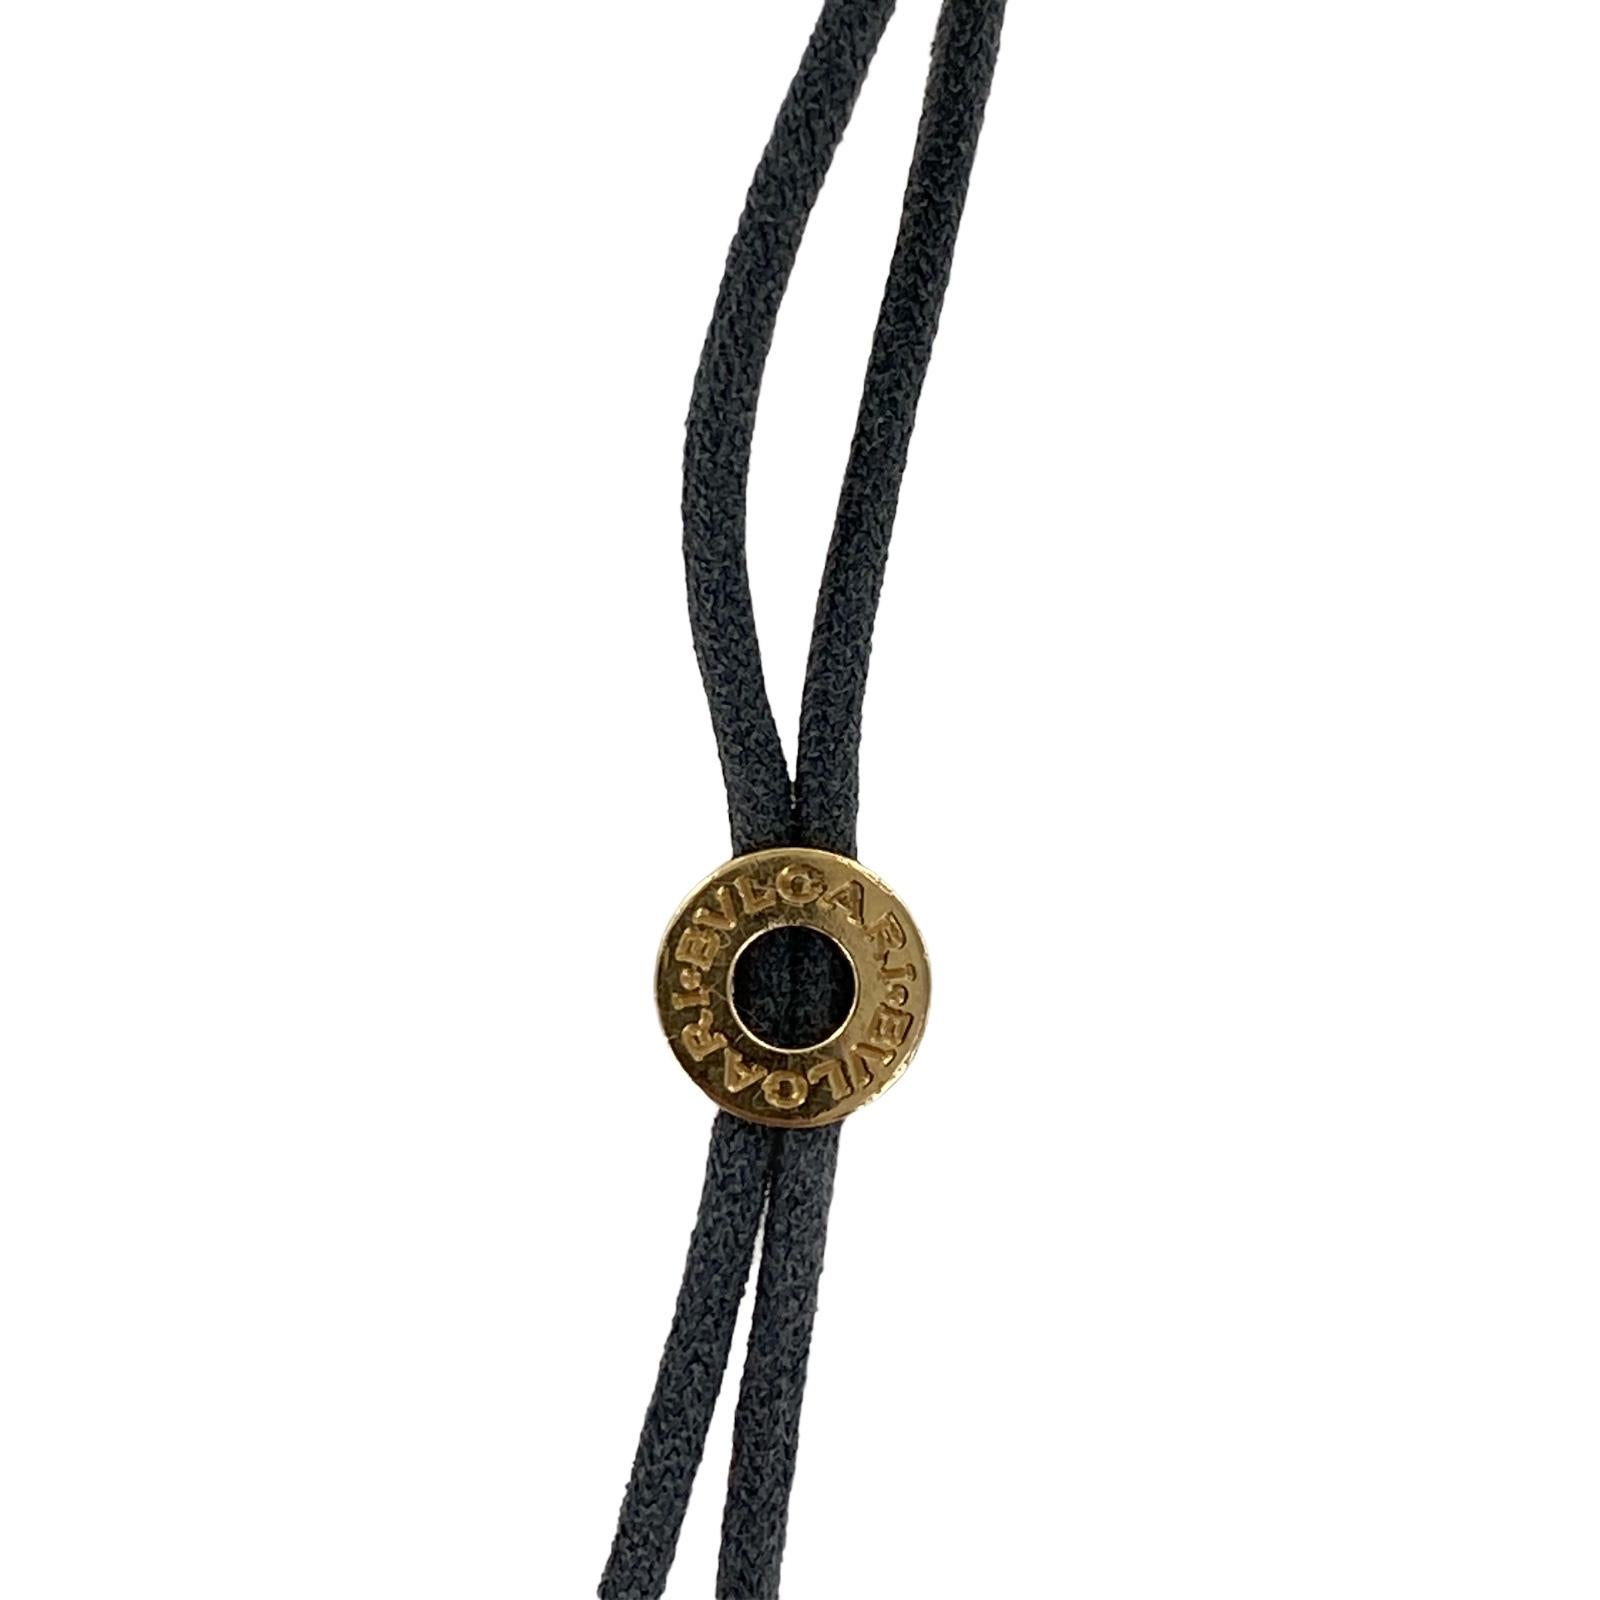 bvlgari necklace leather cord